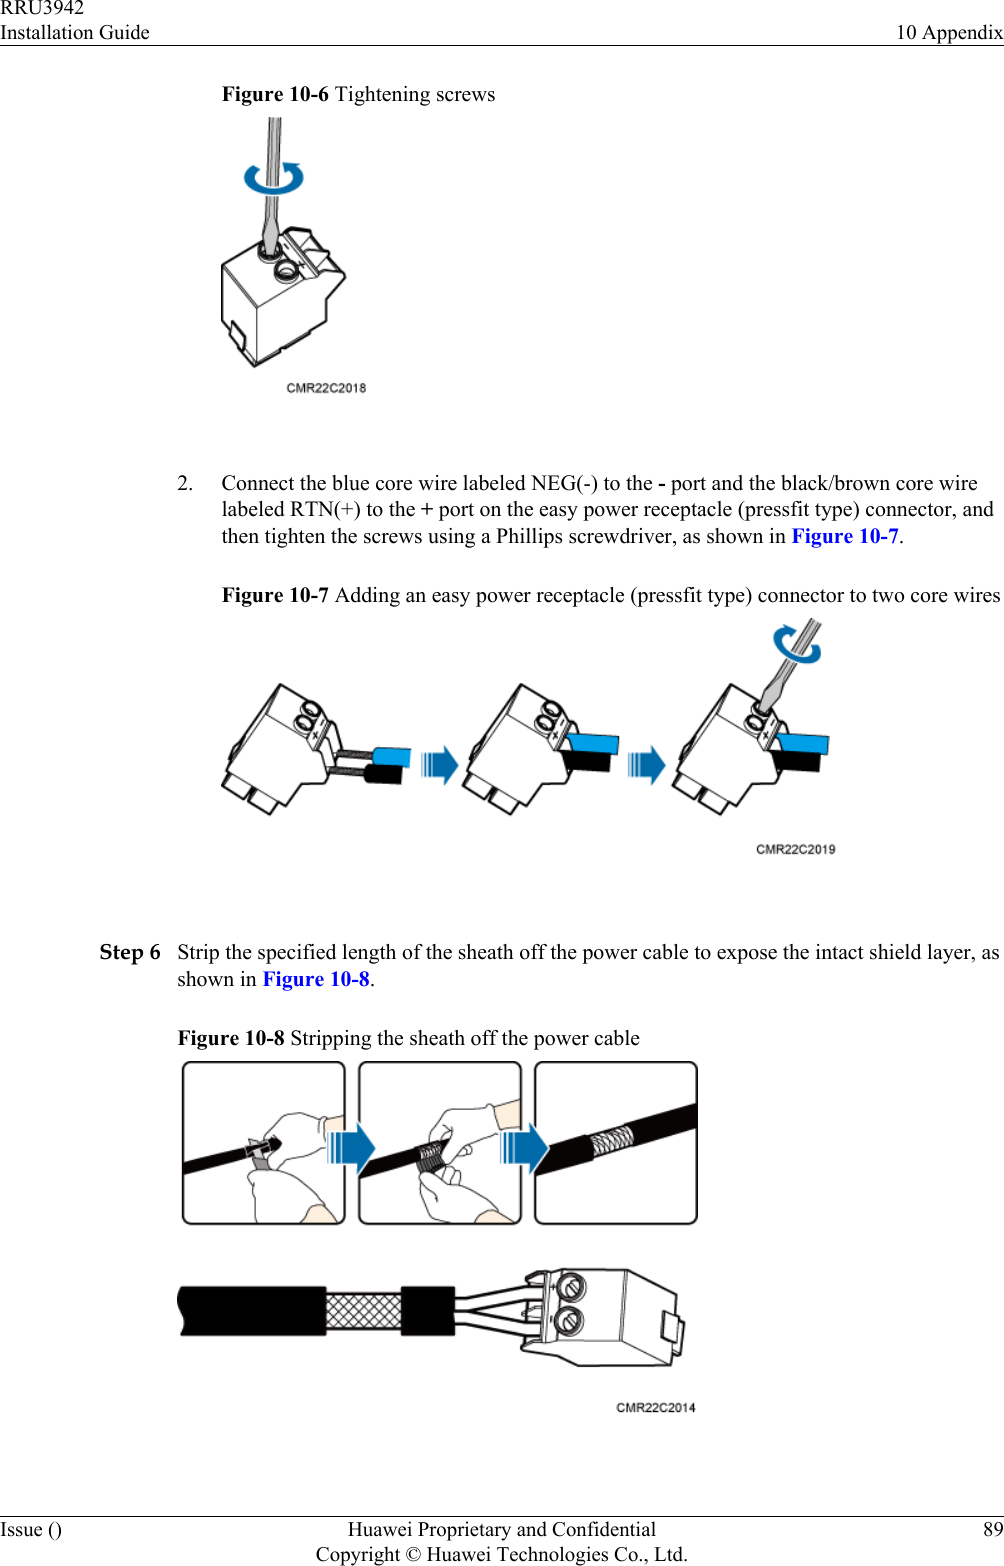 Figure 10-6 Tightening screws 2. Connect the blue core wire labeled NEG(-) to the - port and the black/brown core wirelabeled RTN(+) to the + port on the easy power receptacle (pressfit type) connector, andthen tighten the screws using a Phillips screwdriver, as shown in Figure 10-7.Figure 10-7 Adding an easy power receptacle (pressfit type) connector to two core wires Step 6 Strip the specified length of the sheath off the power cable to expose the intact shield layer, asshown in Figure 10-8.Figure 10-8 Stripping the sheath off the power cable RRU3942Installation Guide 10 AppendixIssue () Huawei Proprietary and ConfidentialCopyright © Huawei Technologies Co., Ltd.89